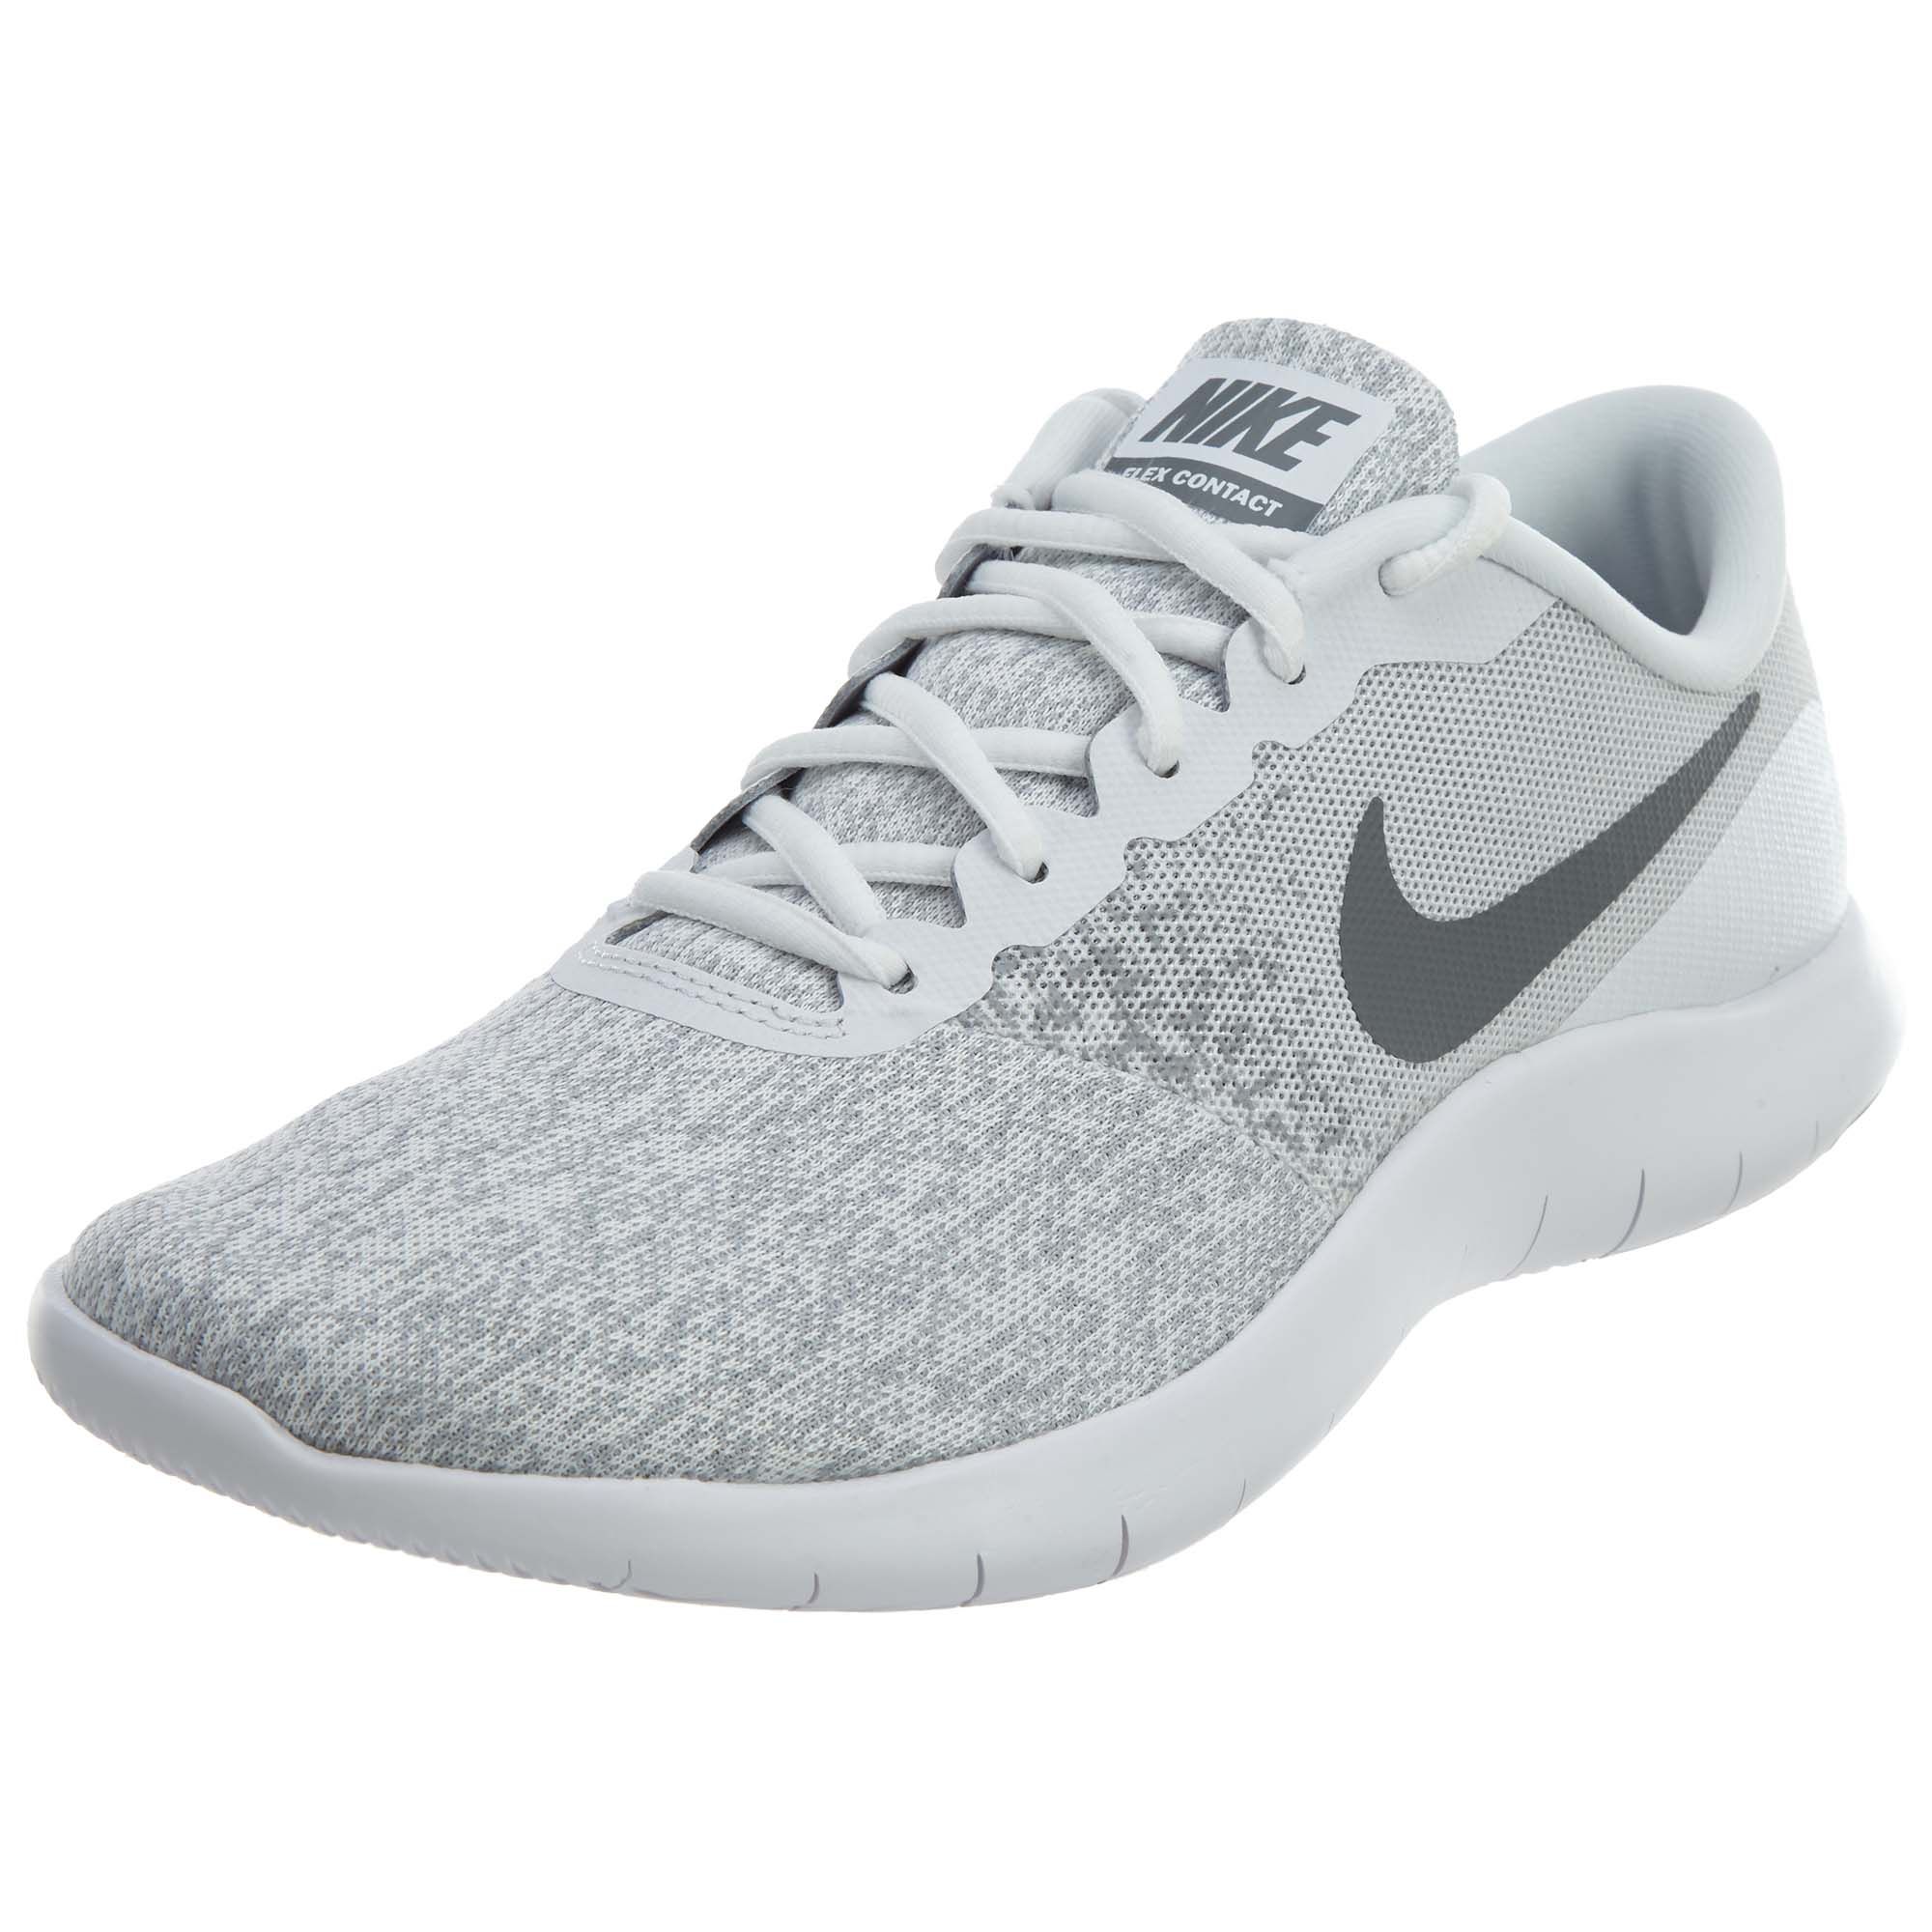 Nike Flex Contact Womens Style : 908995